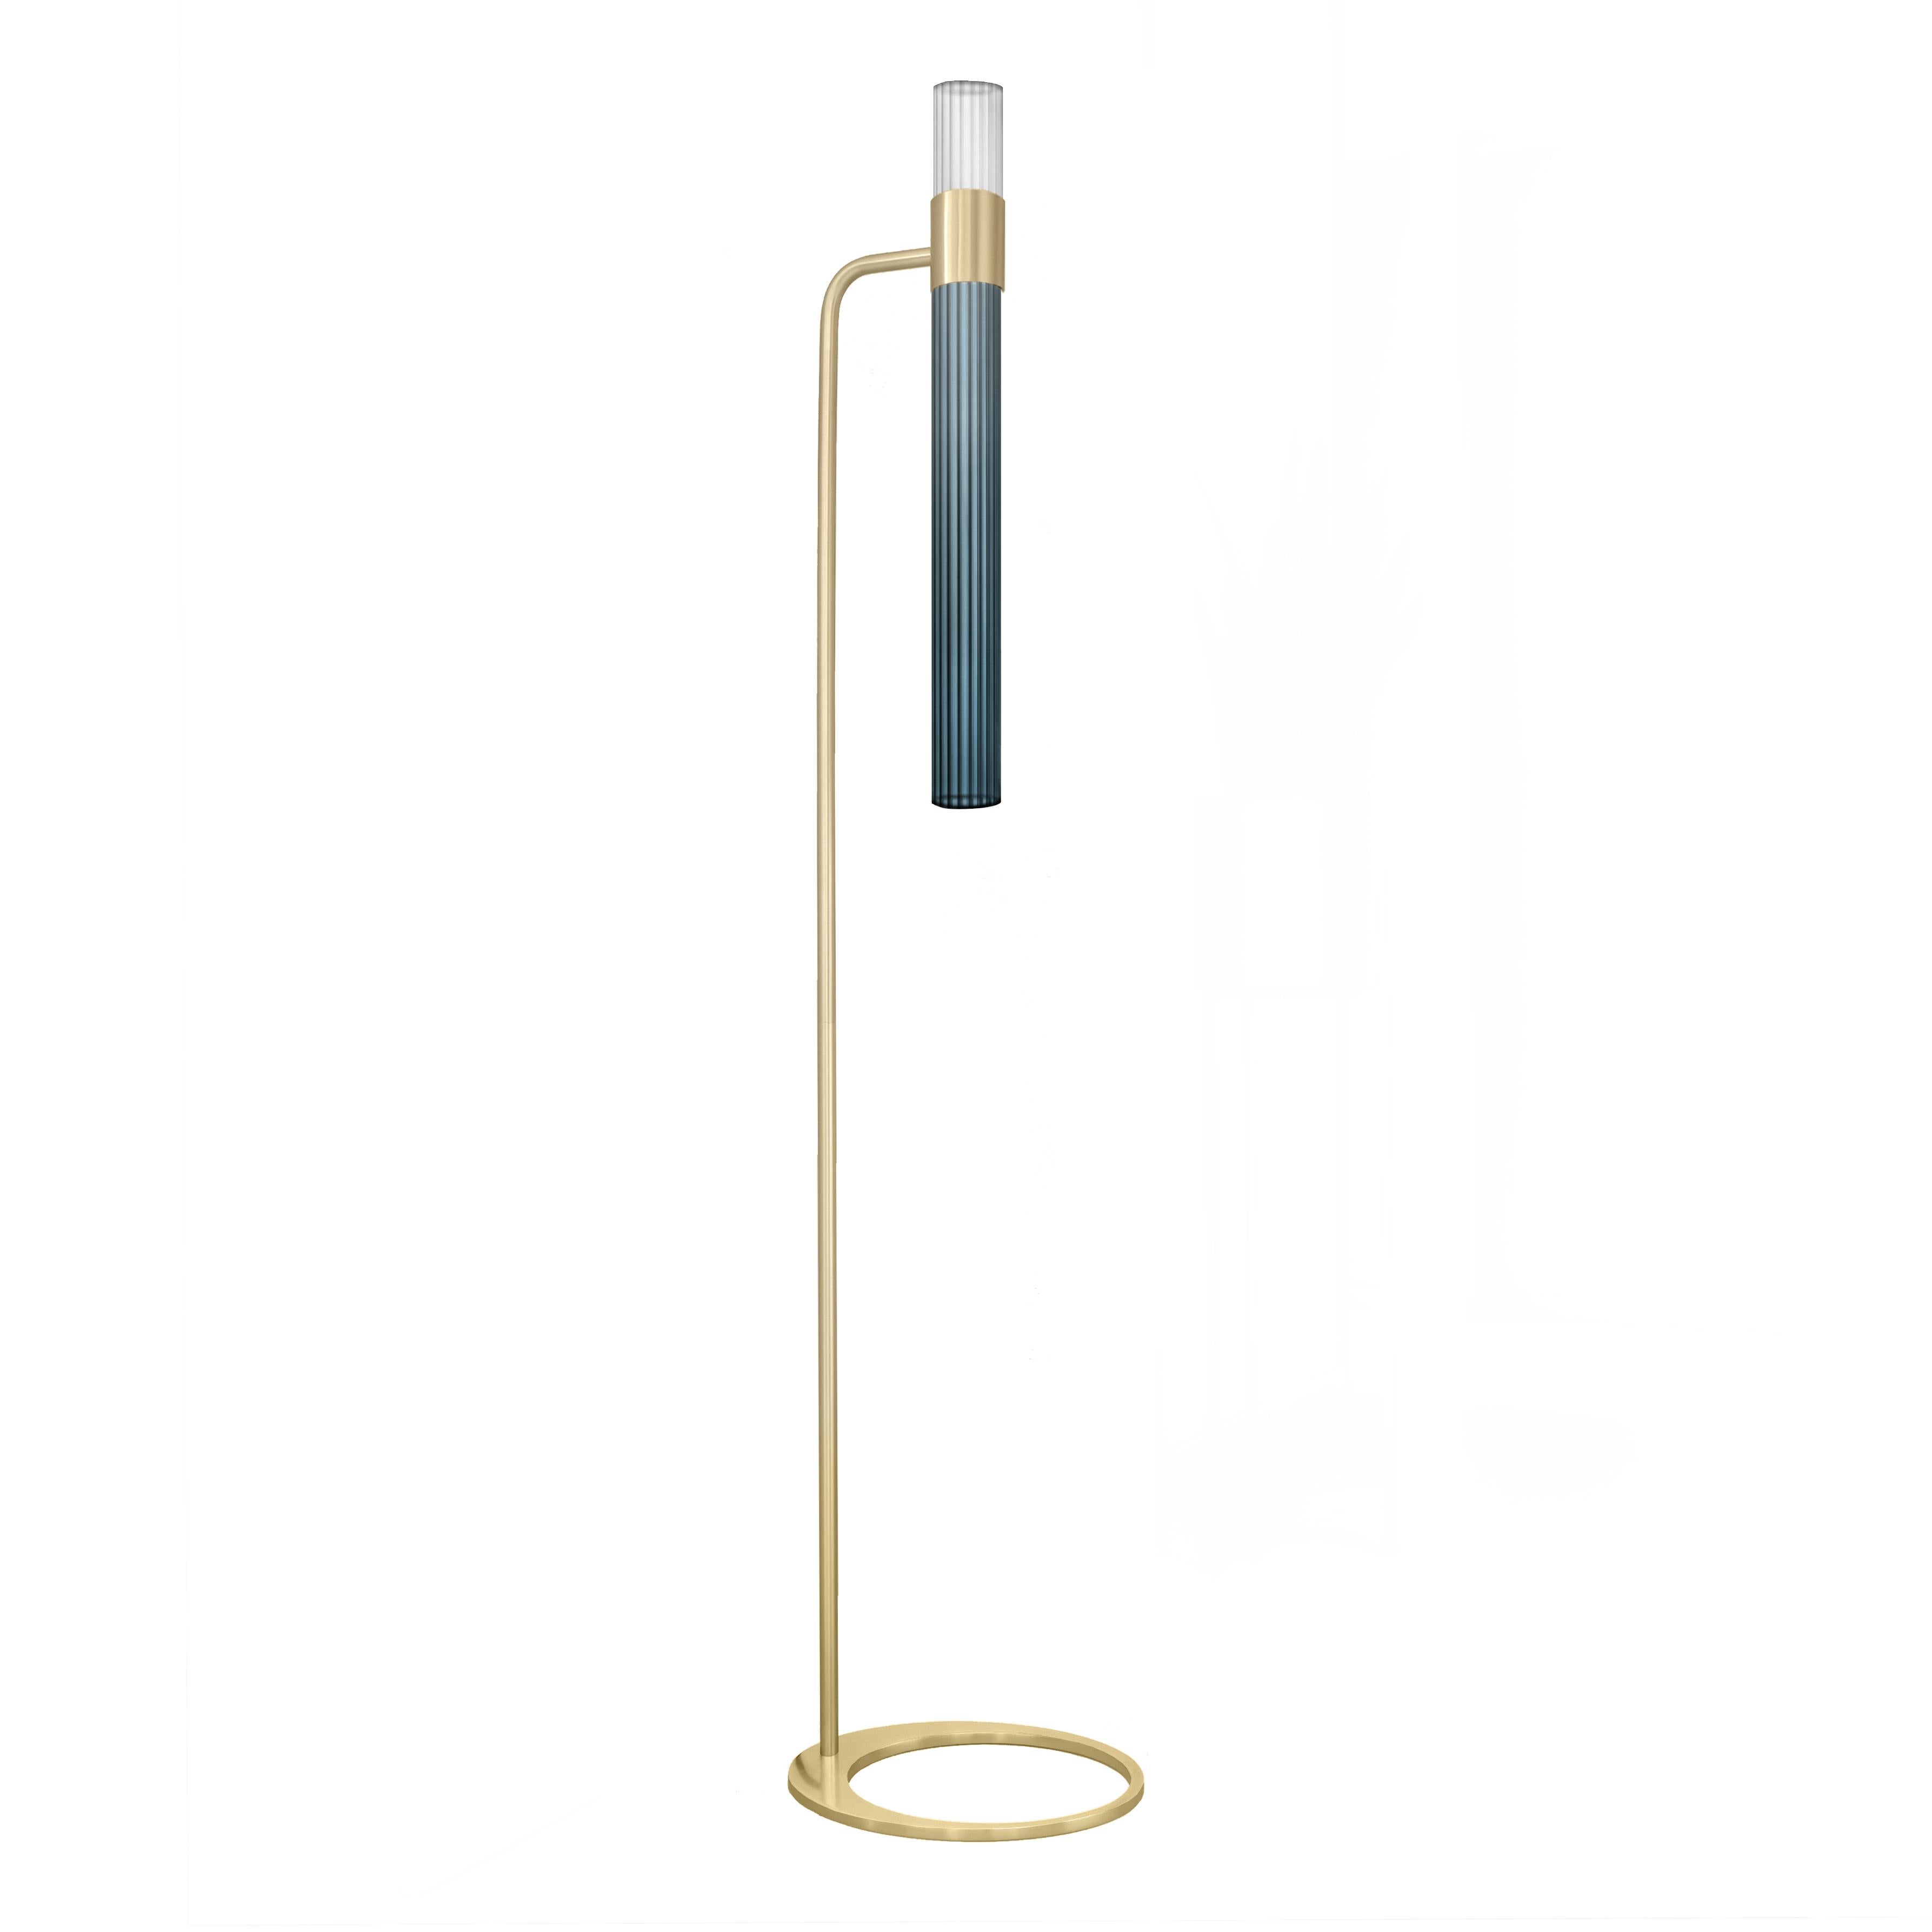 Sbarlusc floor lamp by LUCE TU
Dimensions: 149 x 32.5 cm
Materials: Brass and glass

Sbarlusc in Milanese dialect represents the sparkle of a precious and very bright object. The colored glasses, which combine with each other creating games of